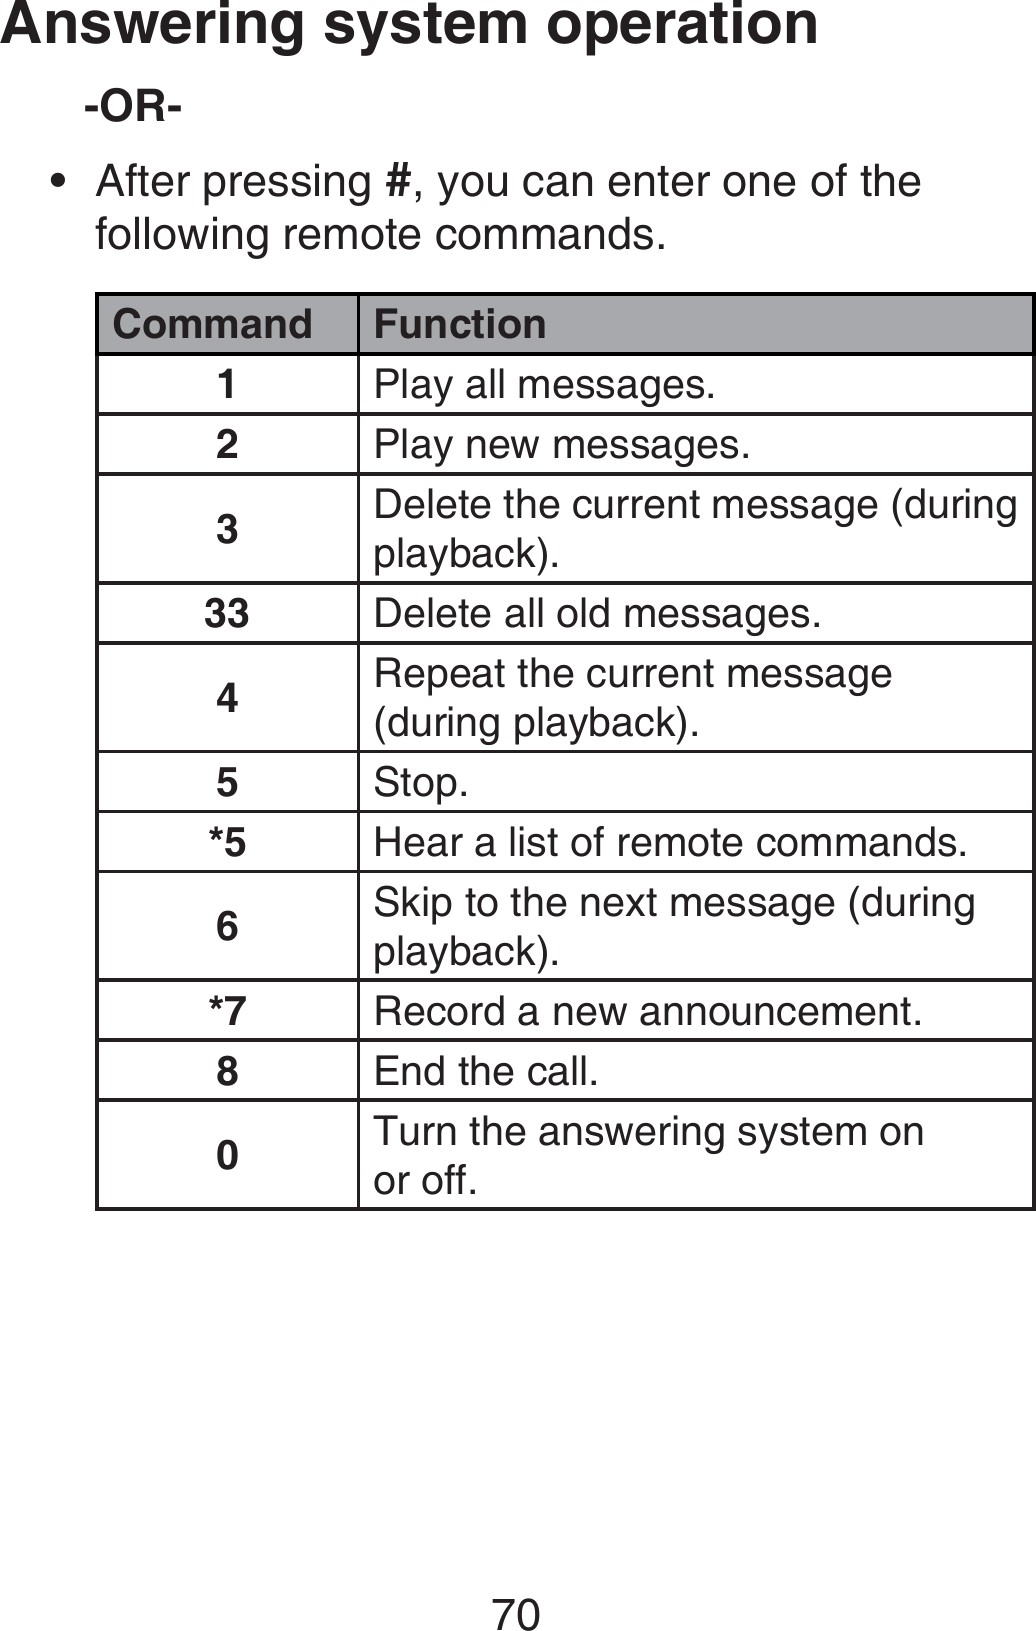 70Answering system operation-OR-After pressing #, you can enter one of the following remote commands.Command Function1Play all messages.2Play new messages.3Delete the current message (during playback).33 Delete all old messages.4Repeat the current message (during playback).5Stop.*5 Hear a list of remote commands.6Skip to the next message (during playback).*7 Record a new announcement.8End the call.0Turn the answering system on  or off.•